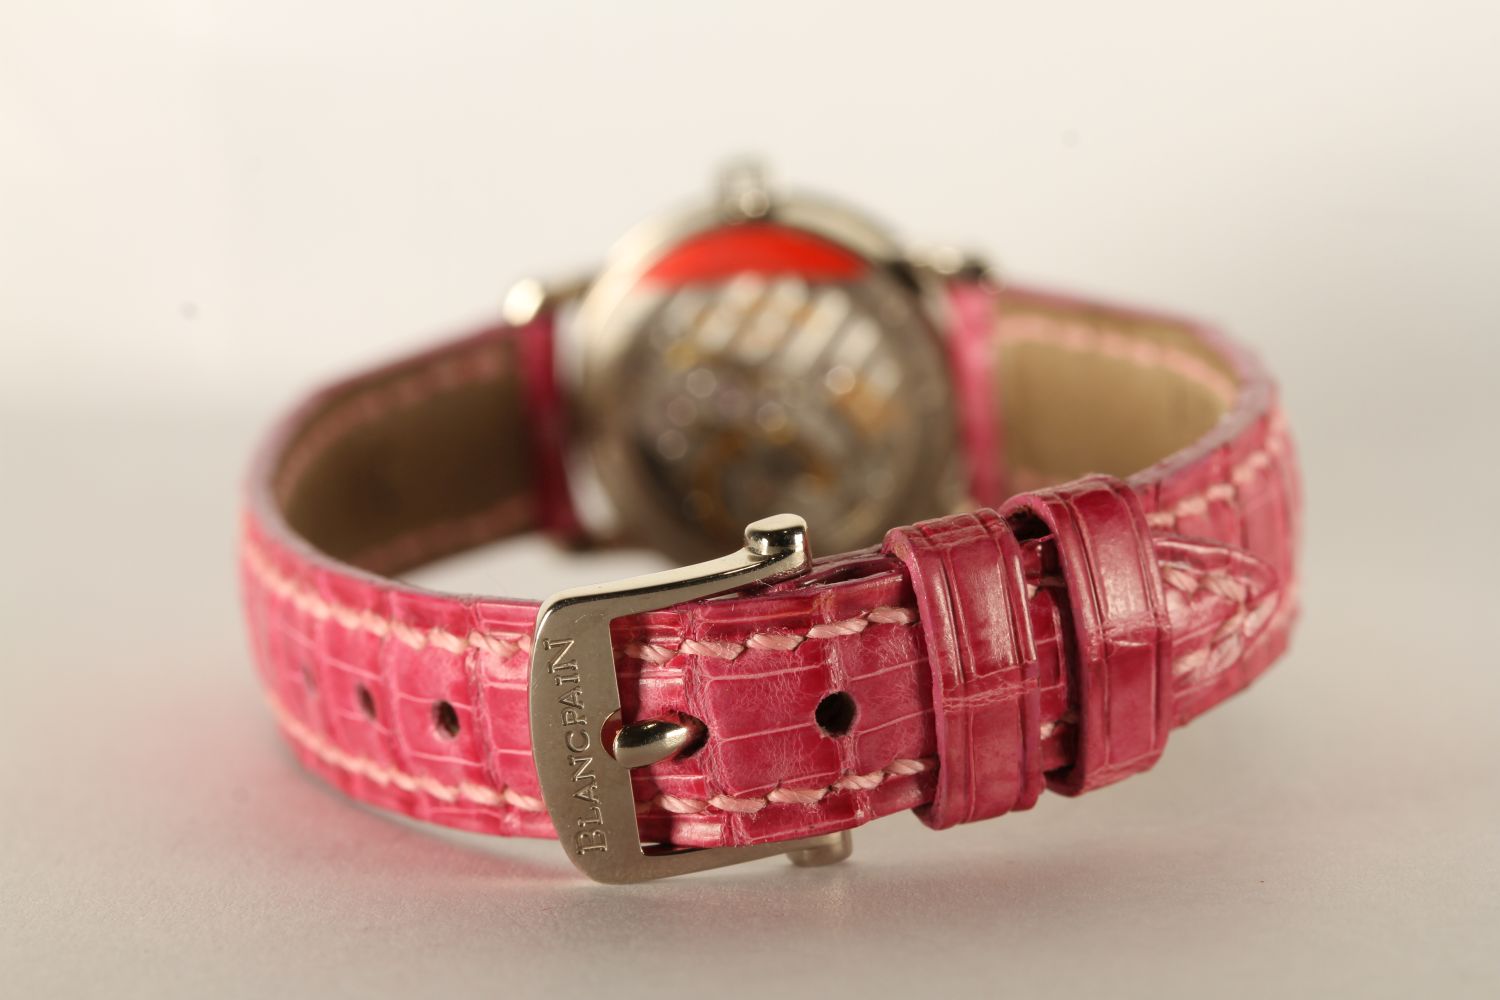 NOS LADIES BLANCPAIN LADYBIRD WRISTWATCH, circular pink mother of pearl dial with roman numerals, - Image 3 of 4